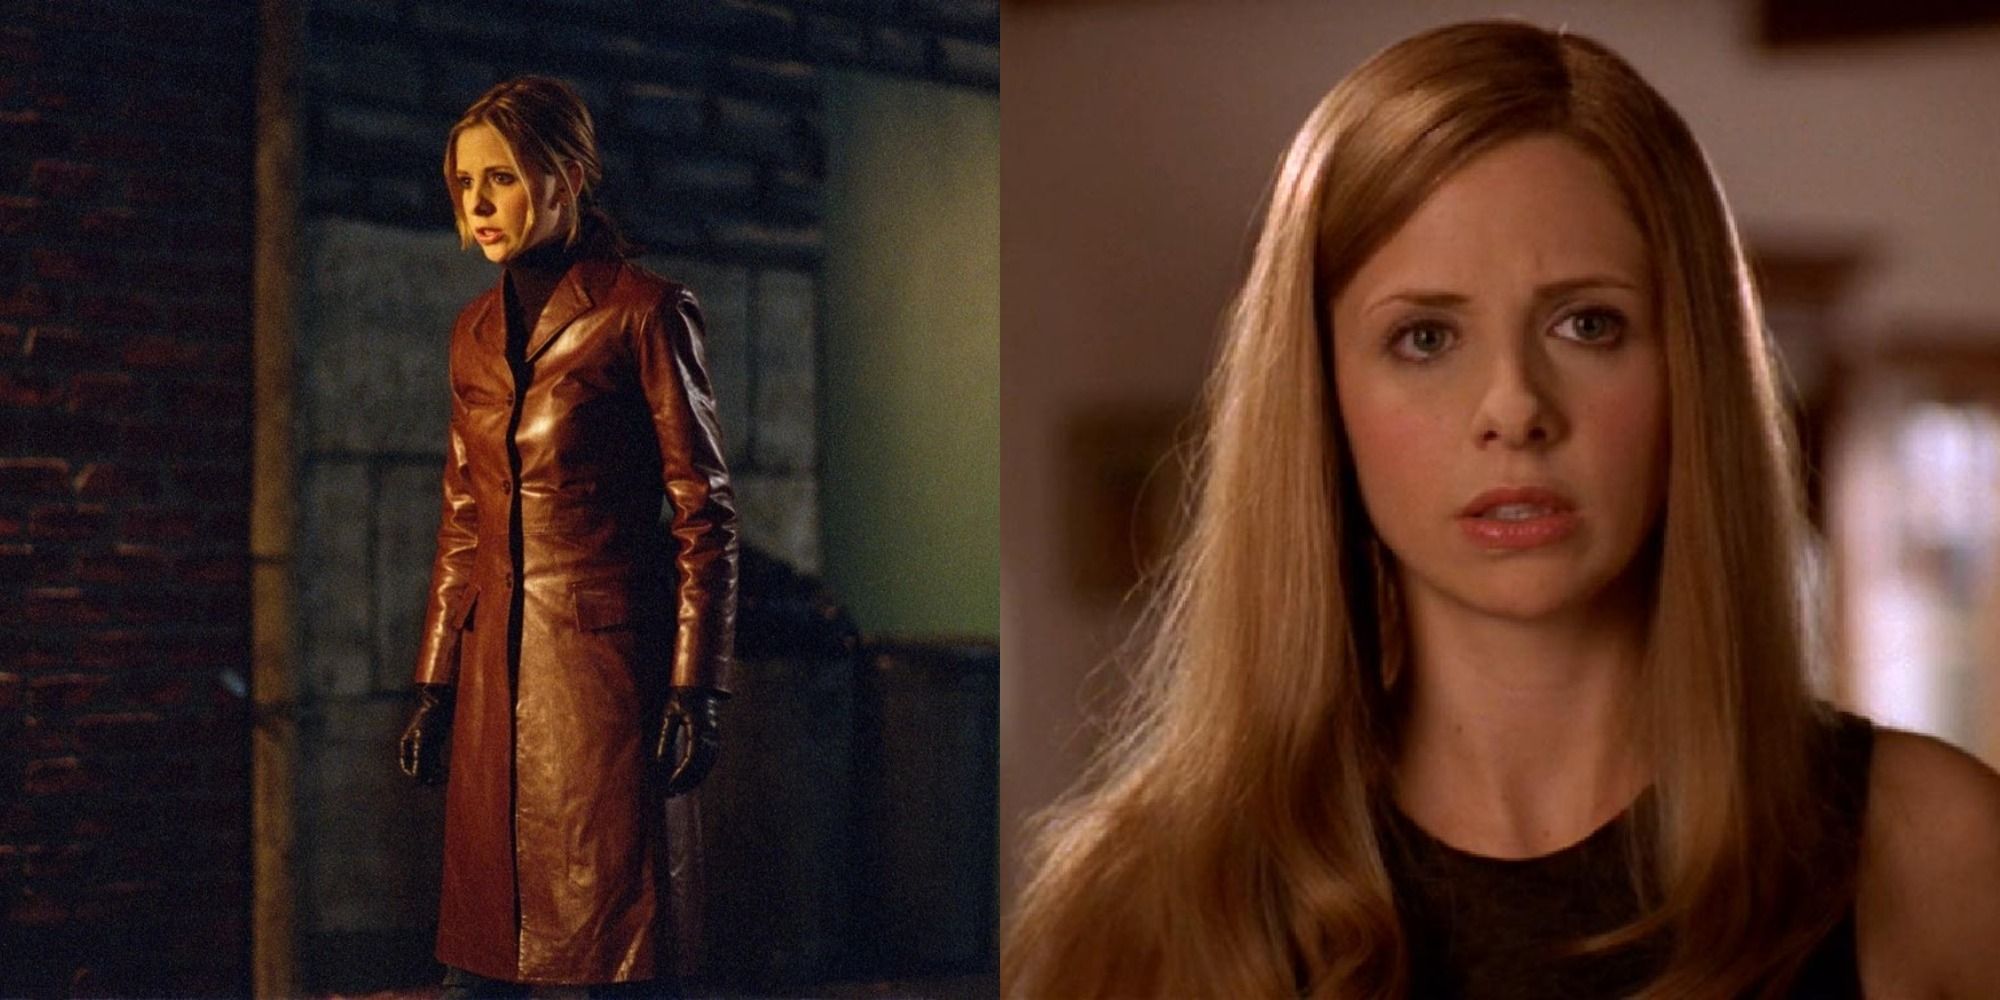 Split Image of Sarah Michelle Gellar as Buffy on both sides; looking to the left on the left image and facing the camera on the right image